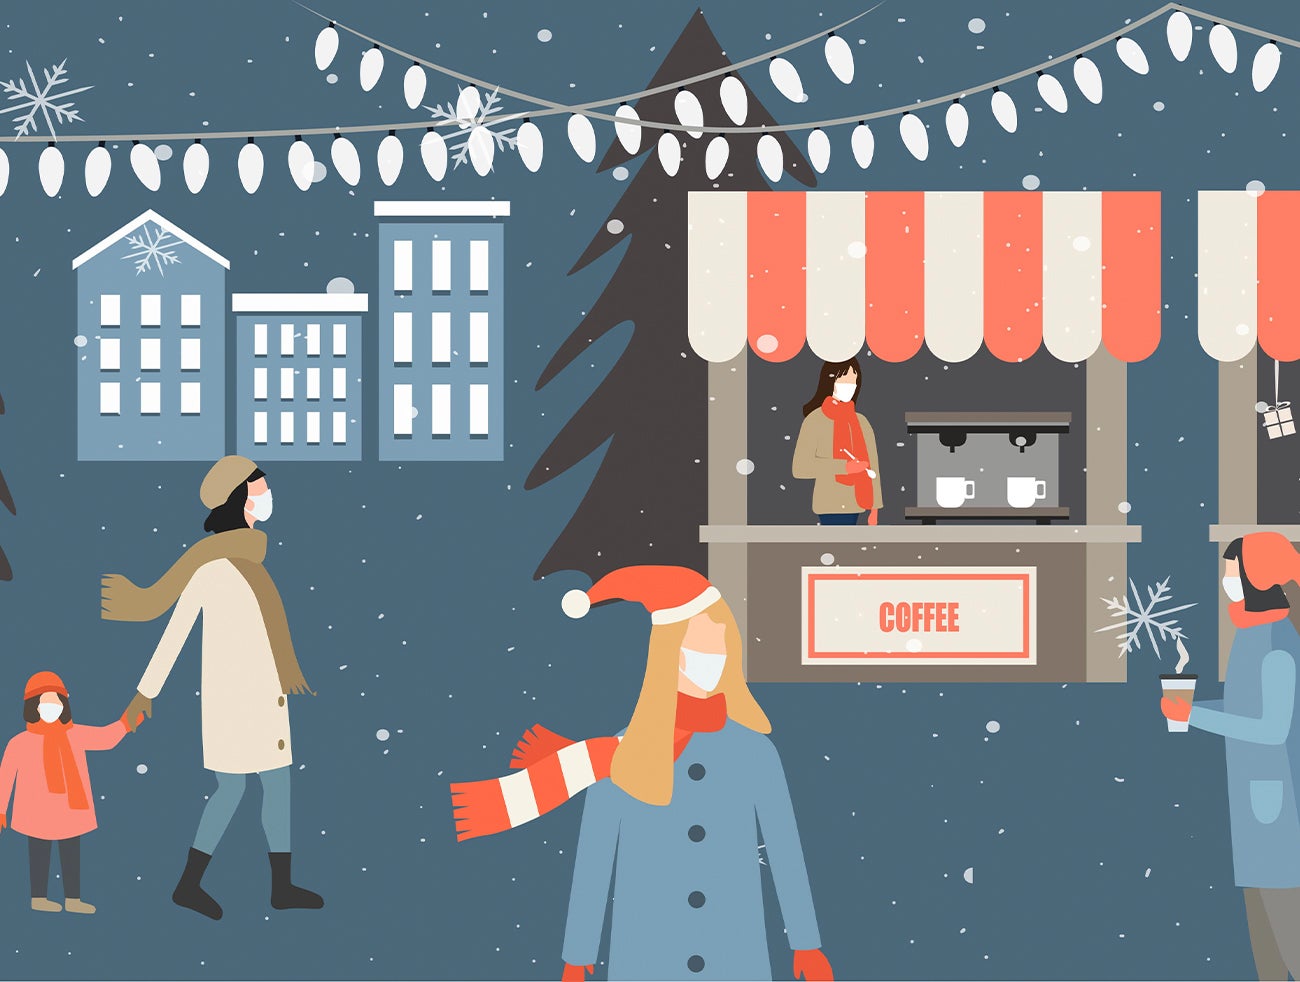 Skip the queues and avoid the crowds with your Christmas shopping this year and instead shop local online instead